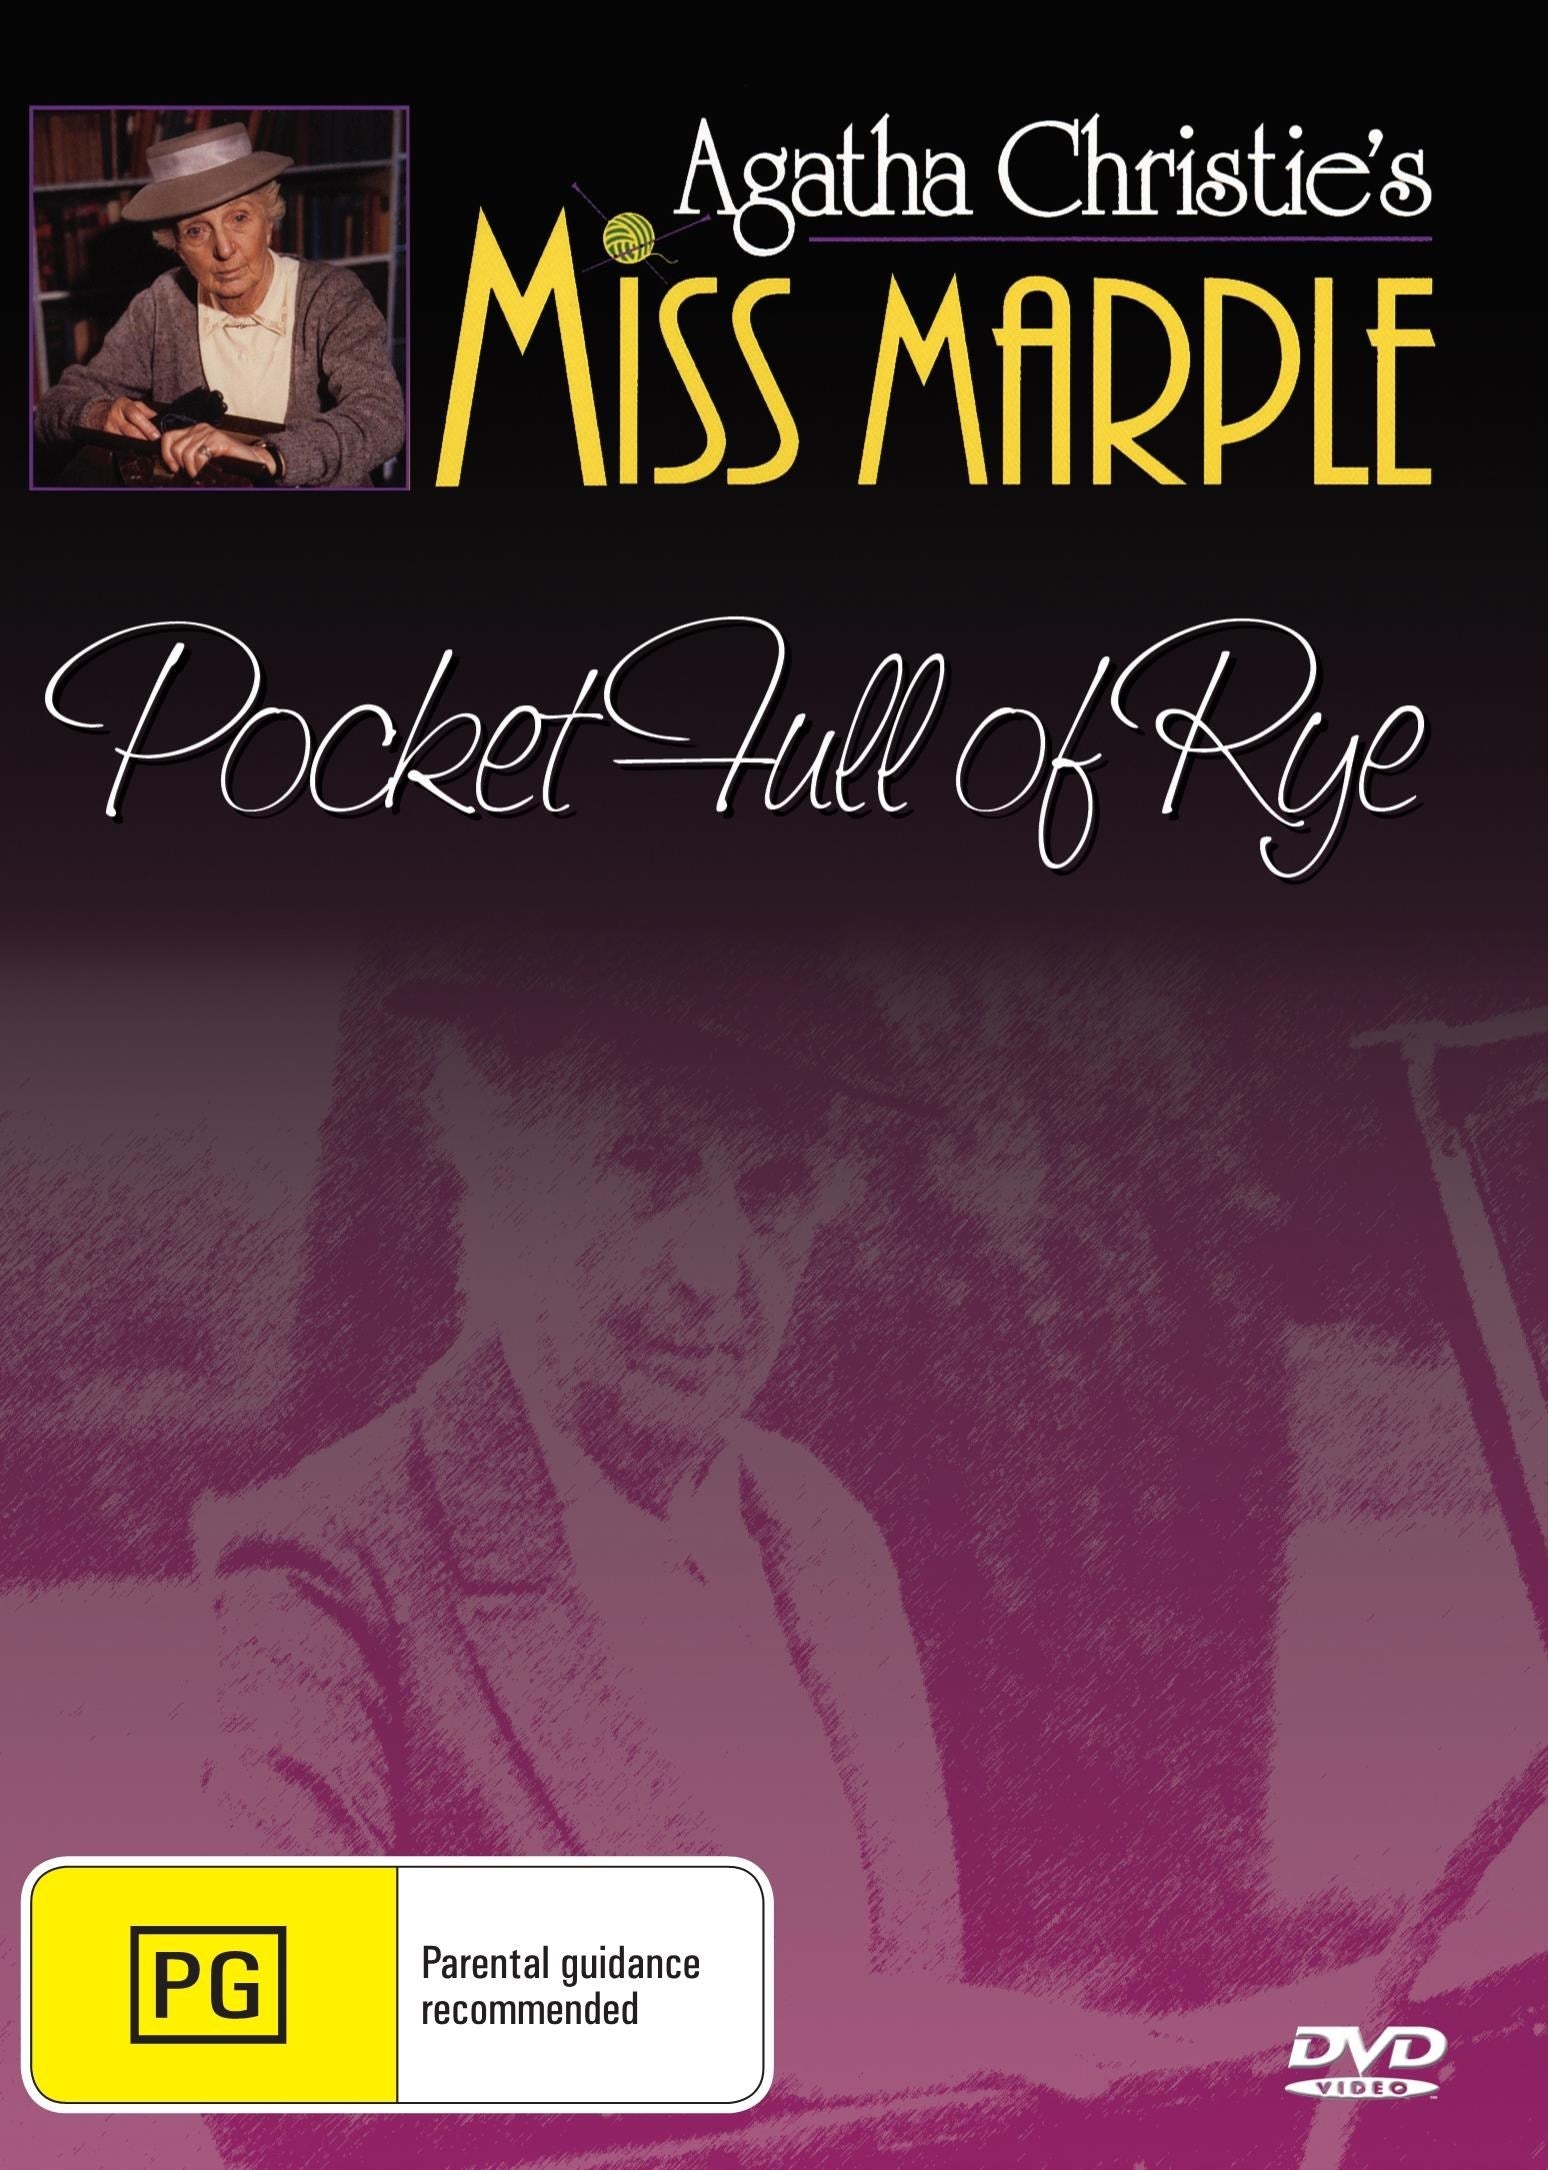 Miss Marple: A Pocketful of Rye rareandcollectibledvds